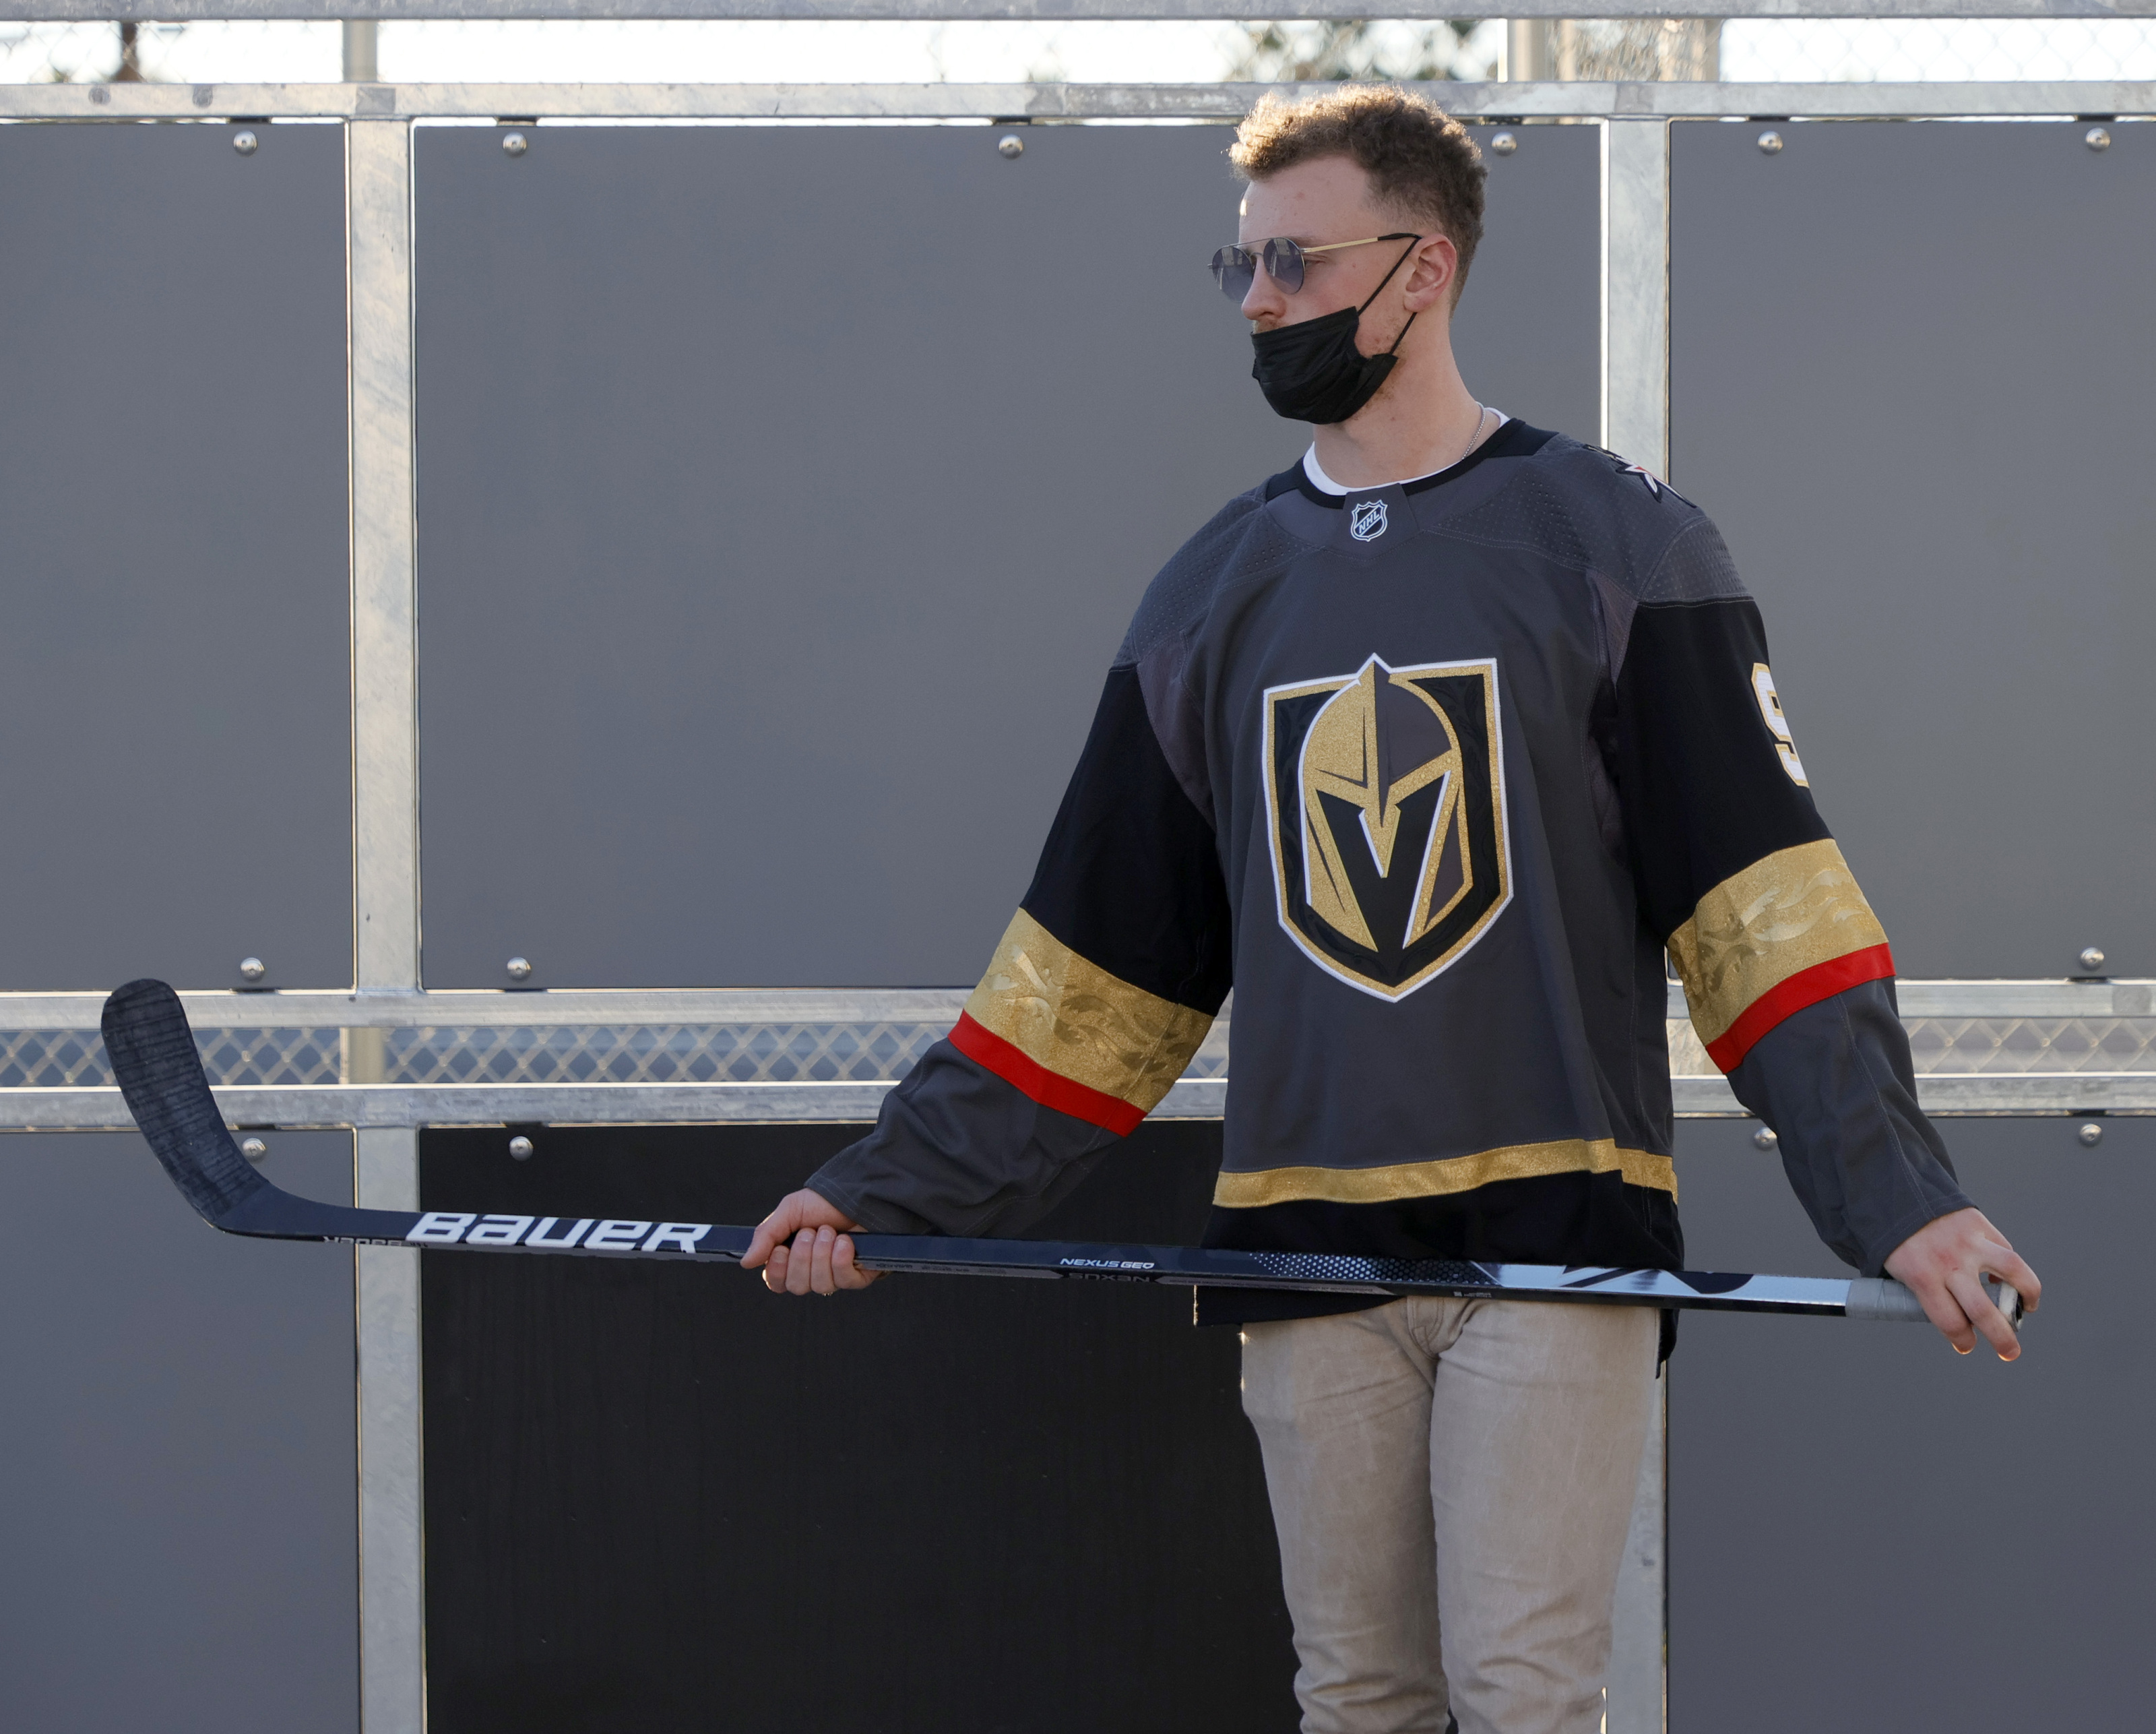 Jack Eichel to arrive in Las Vegas this week, join Golden Knights